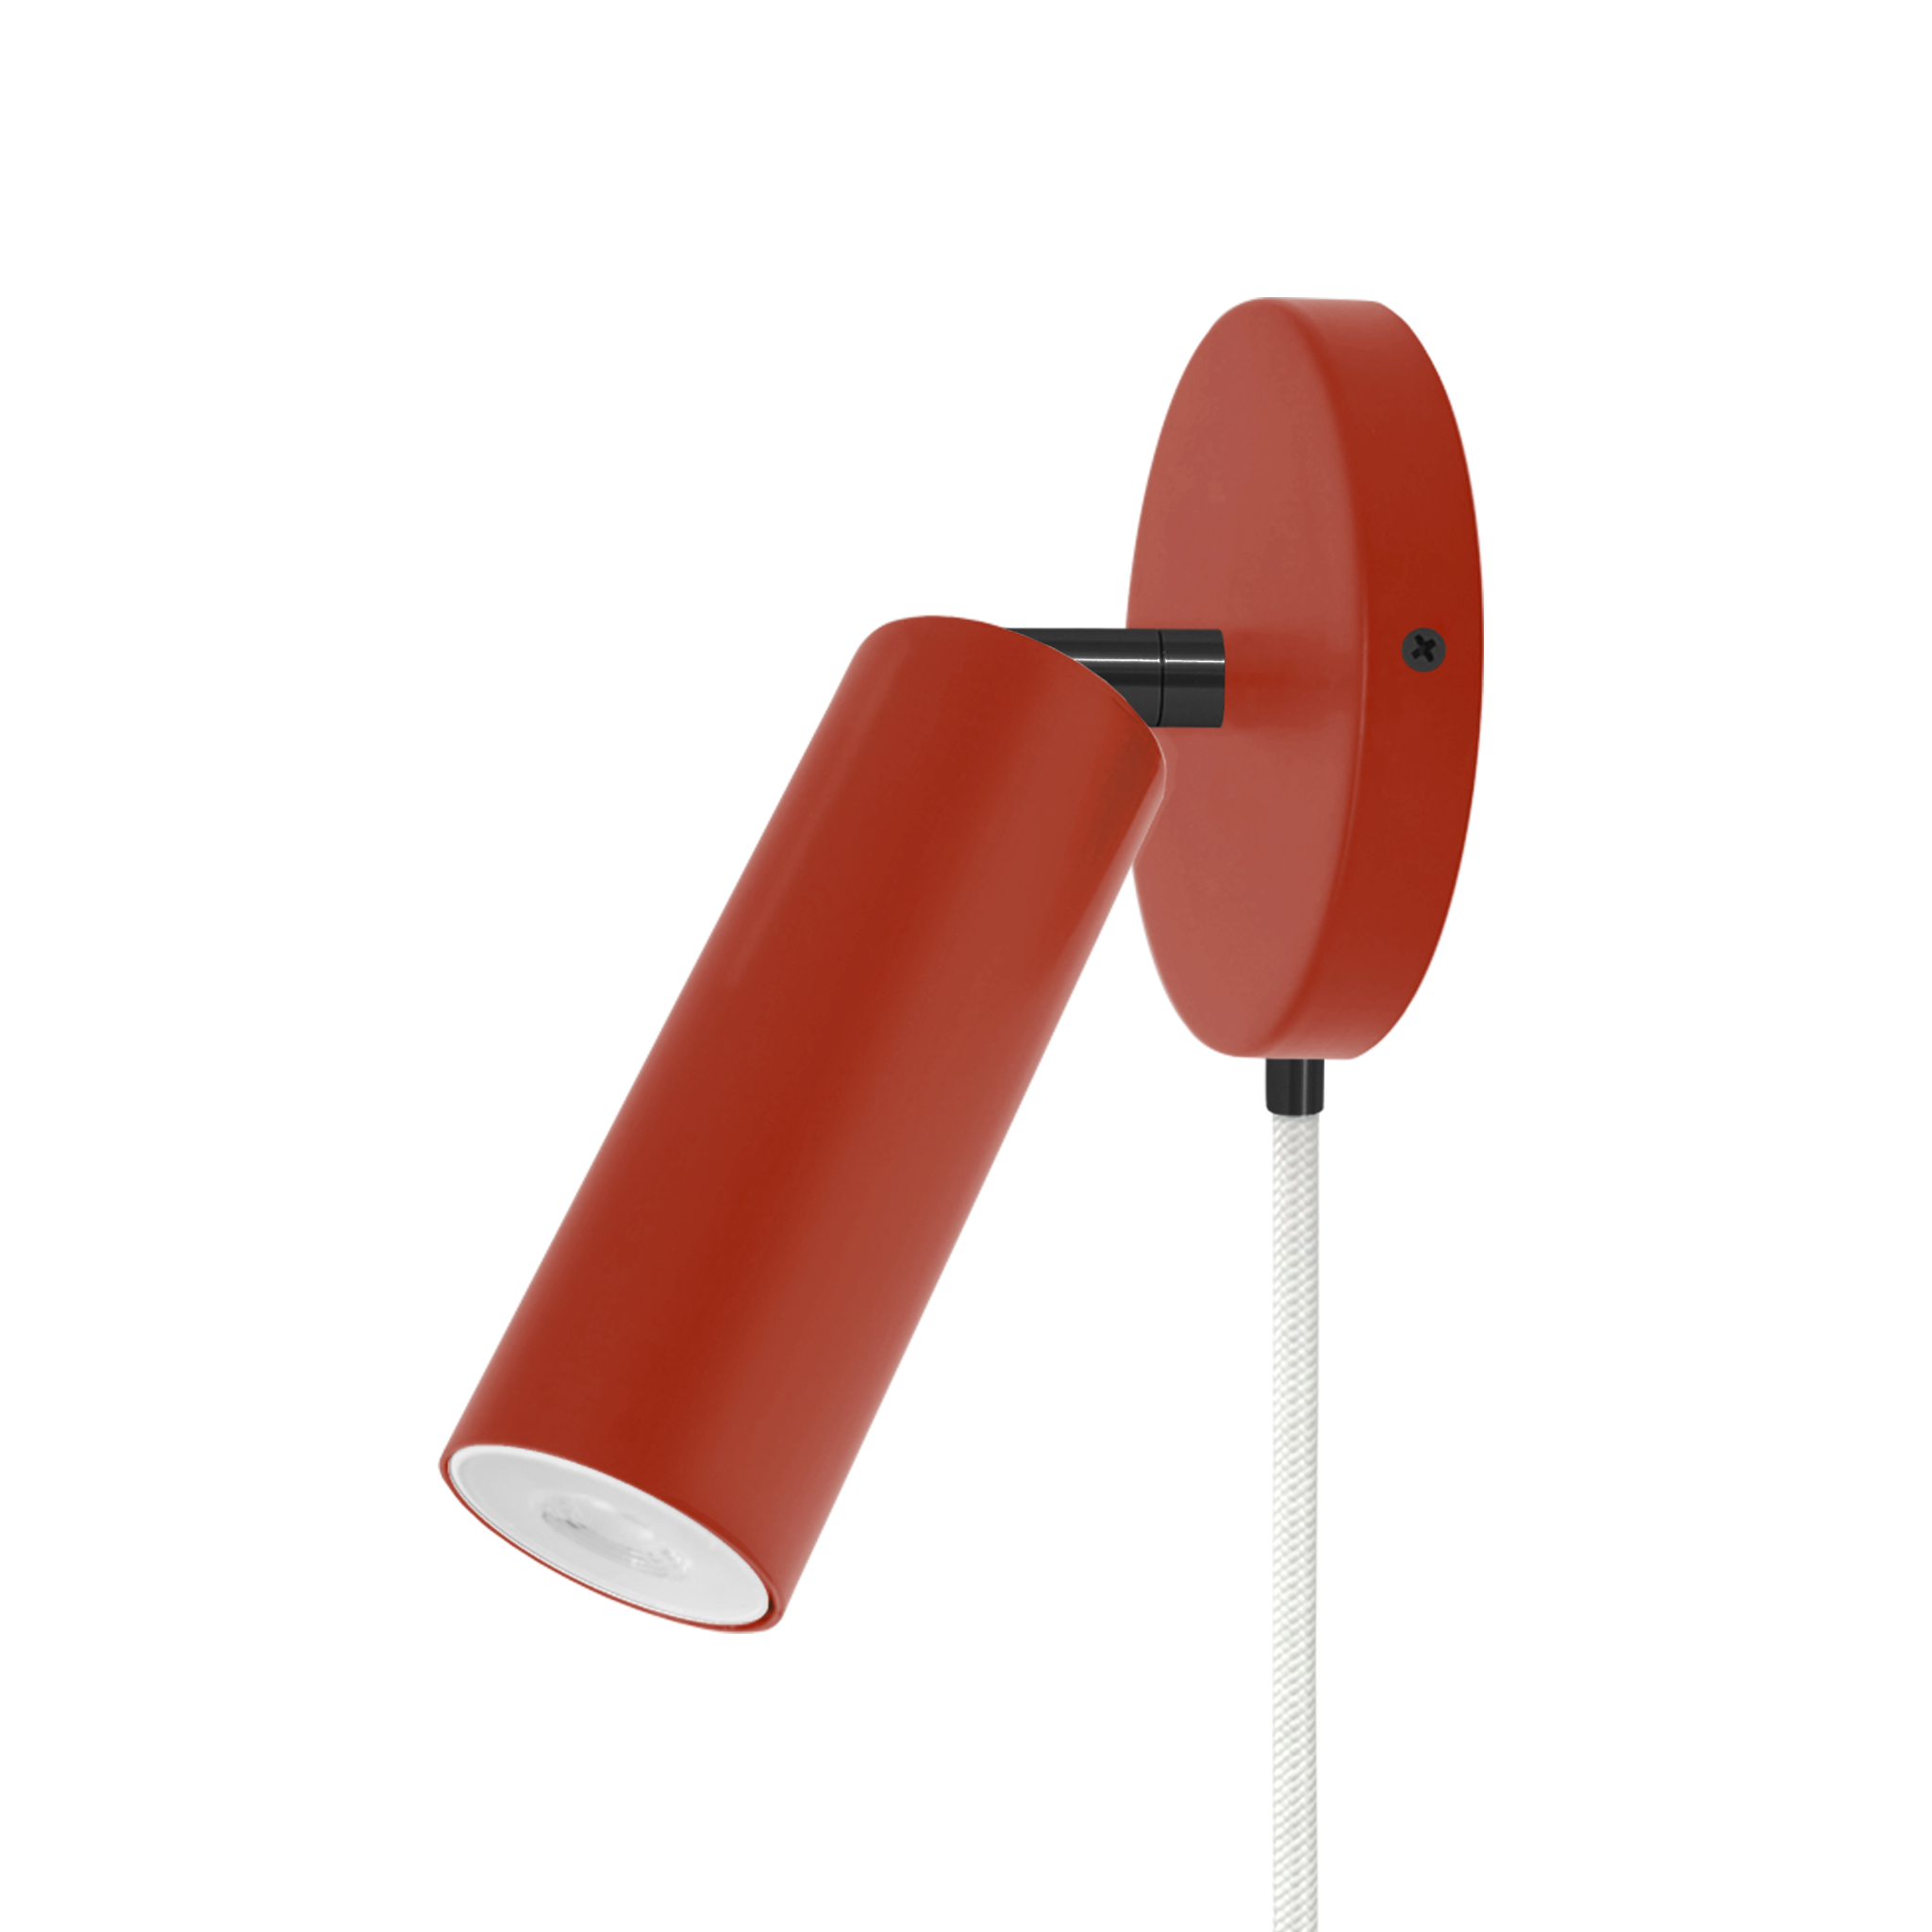 Black and riding hood red color Reader plug-in sconce no arm Dutton Brown lighting